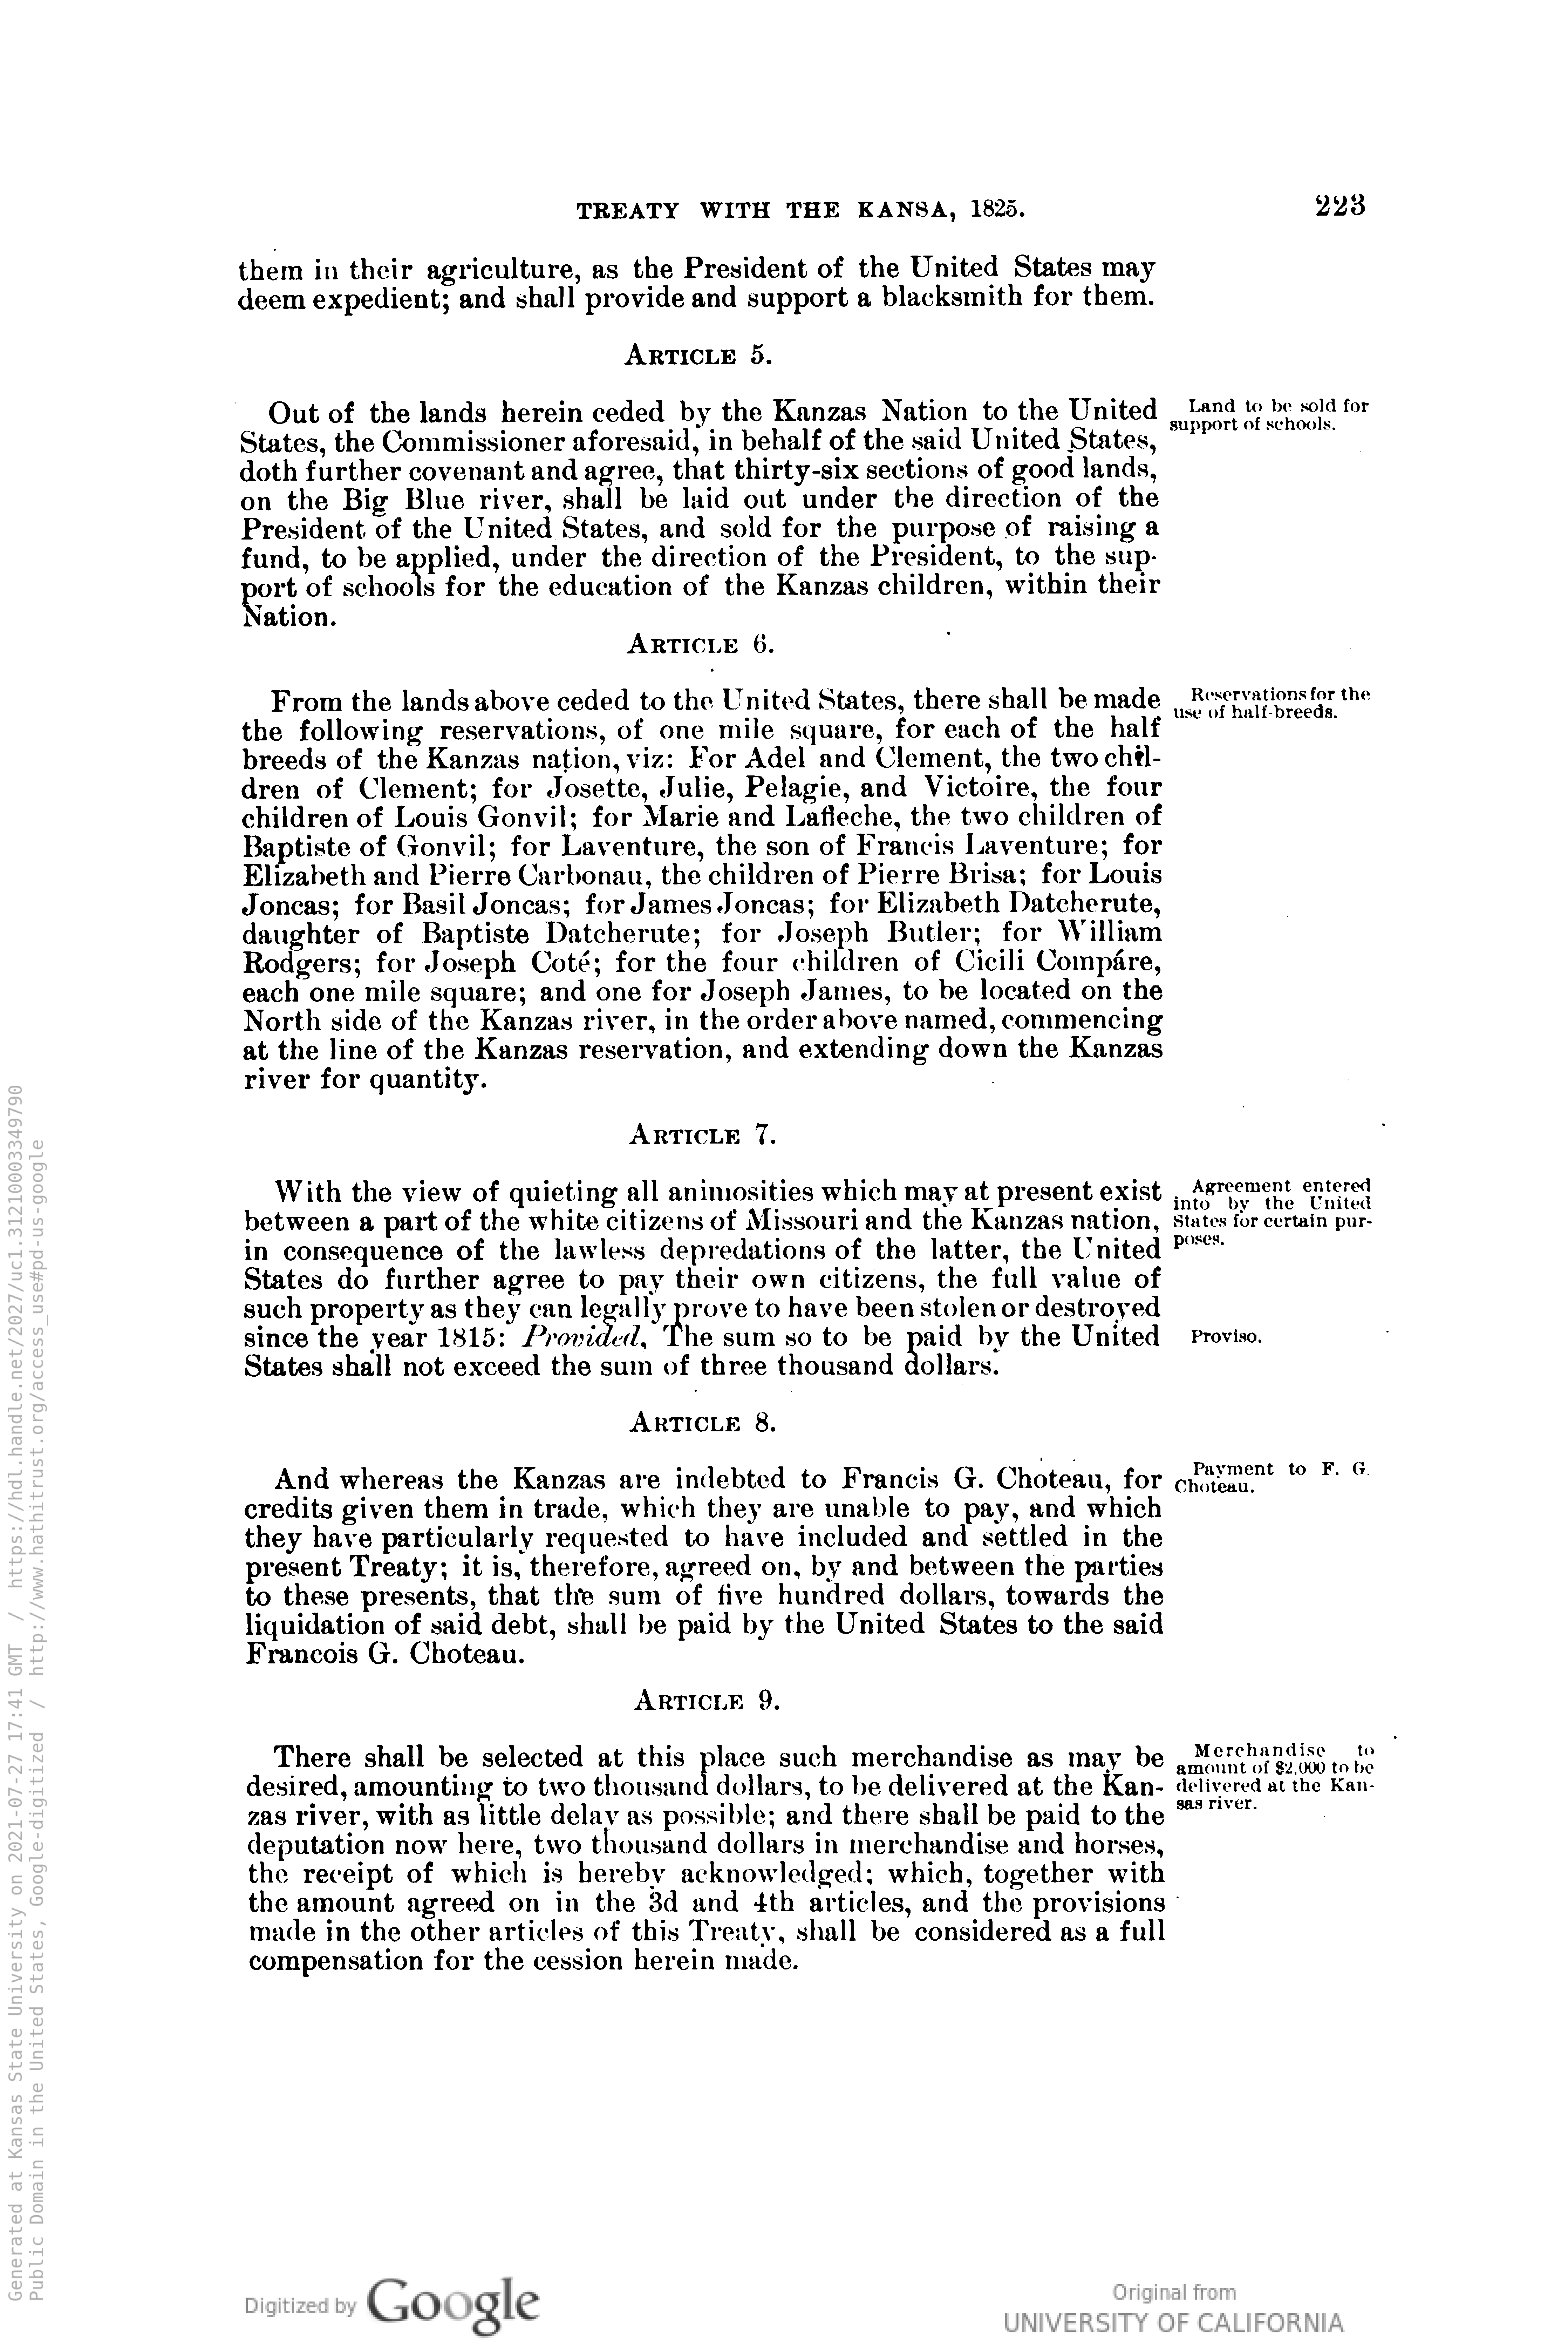 Treaty of 1825, Page 2